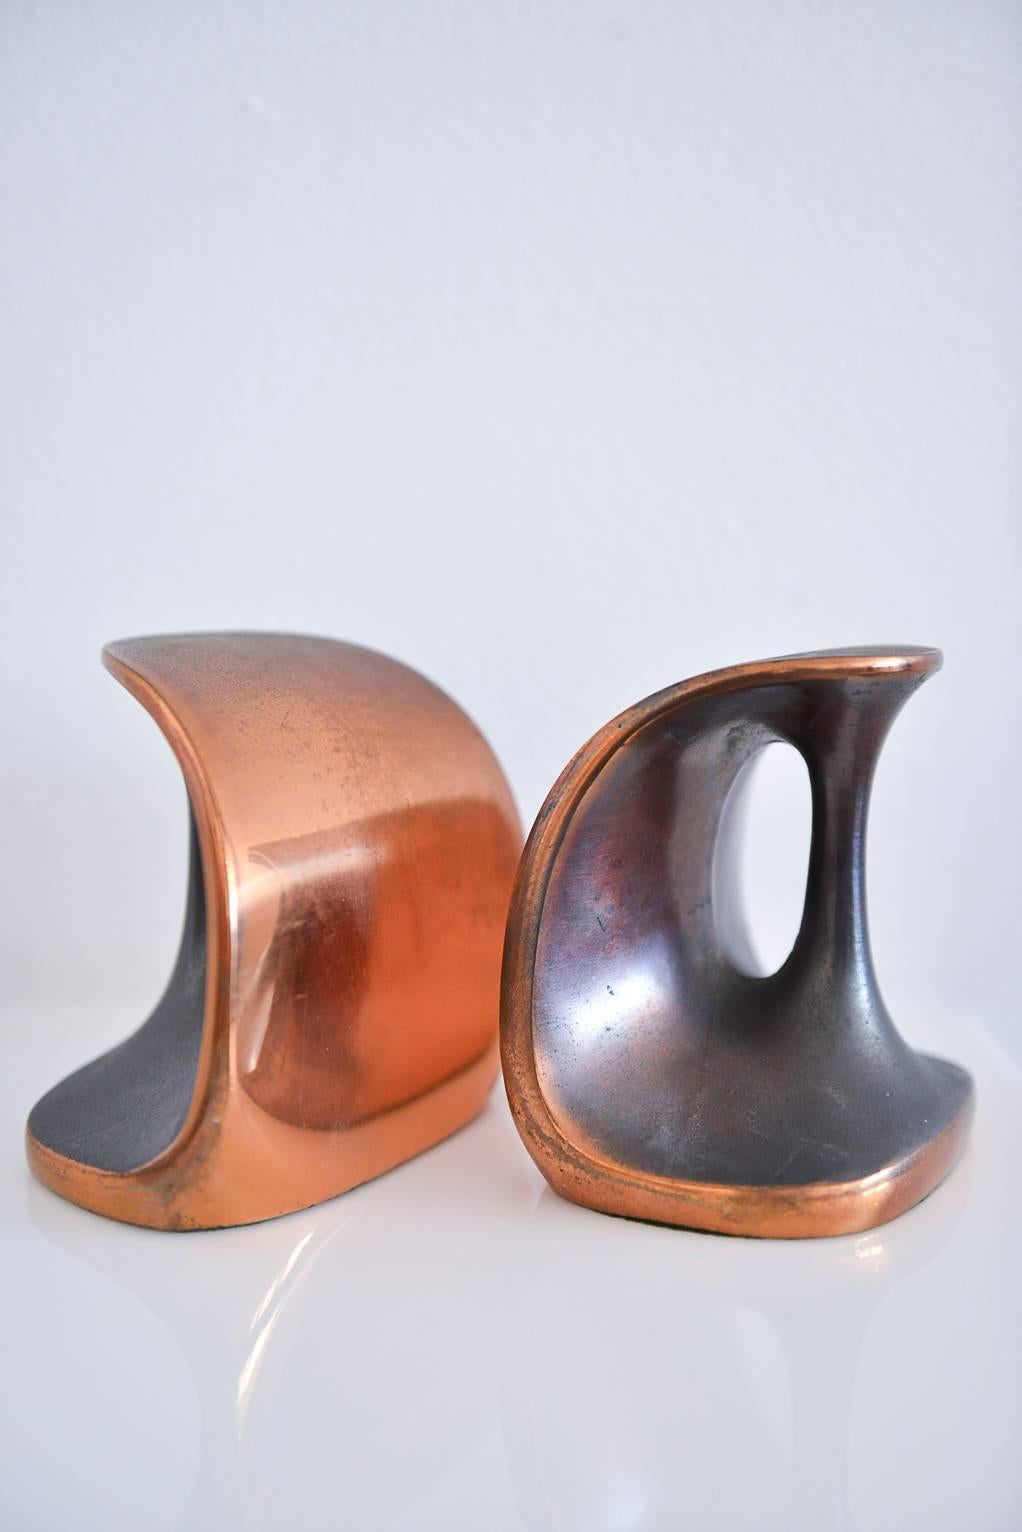 Cast Ben Seibel Copper Plated Bookends